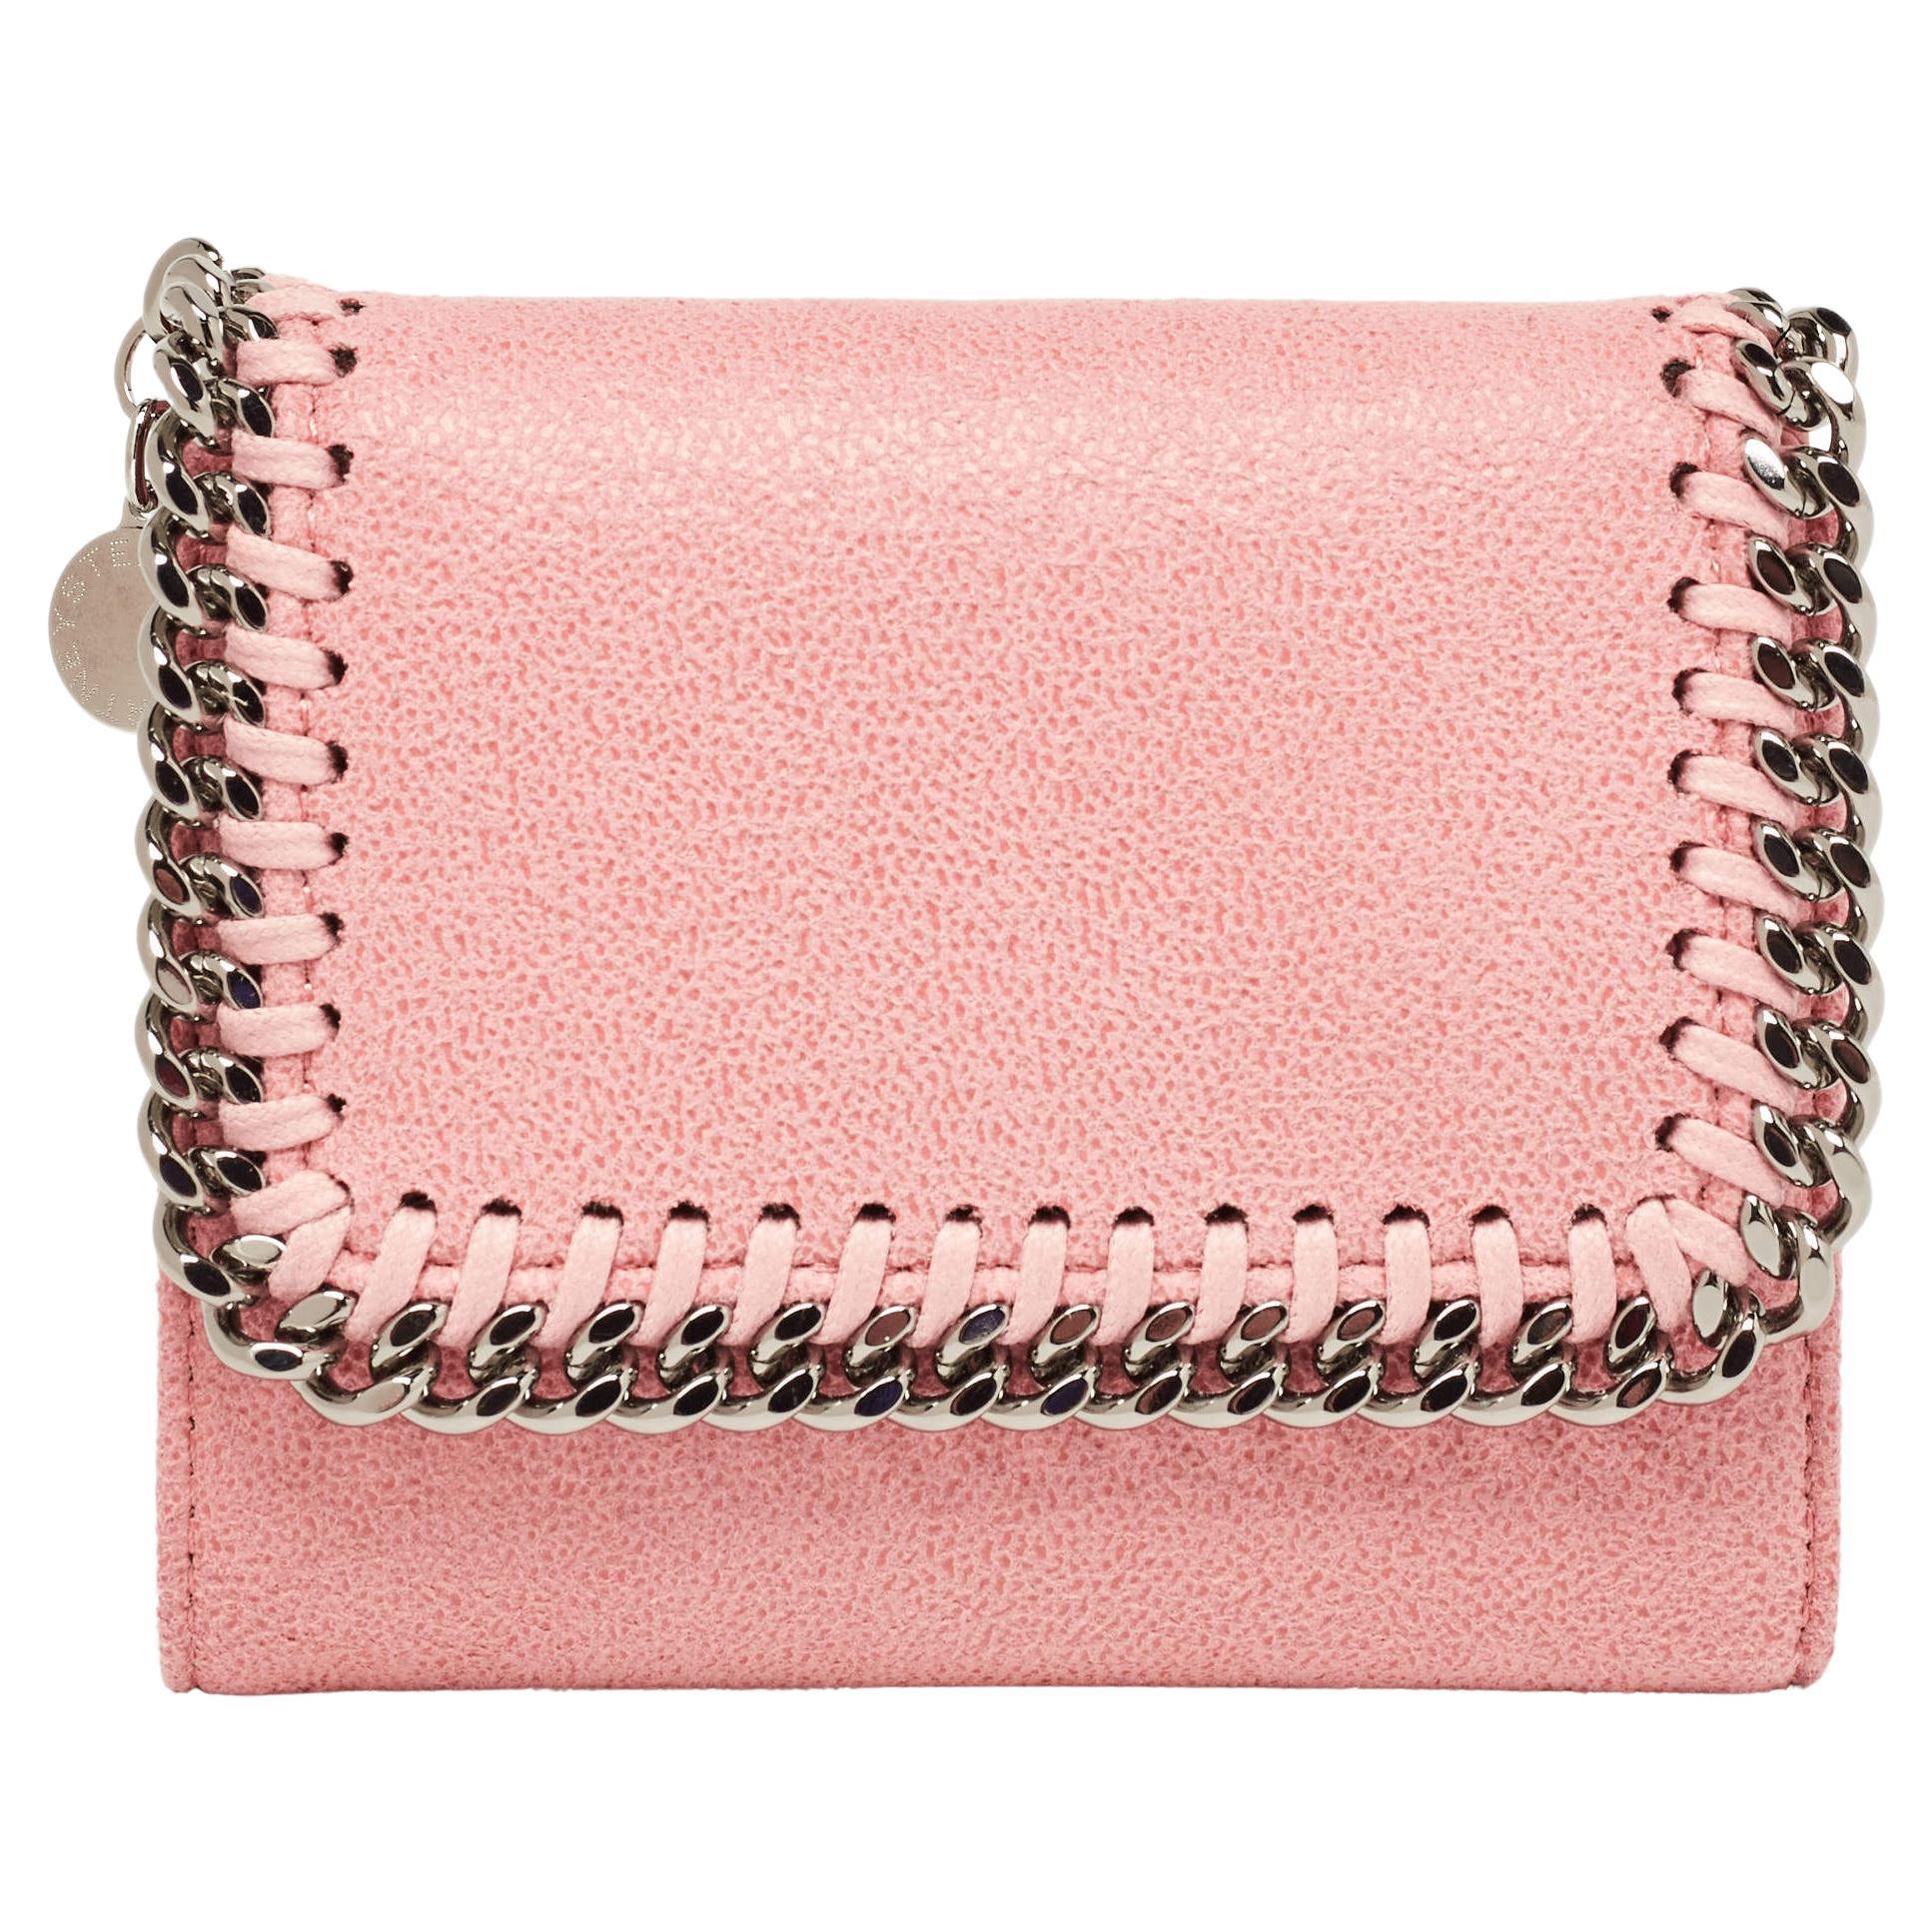 Stella McCartney Pink Faux Leather Falabella Compact Wallet For Sale